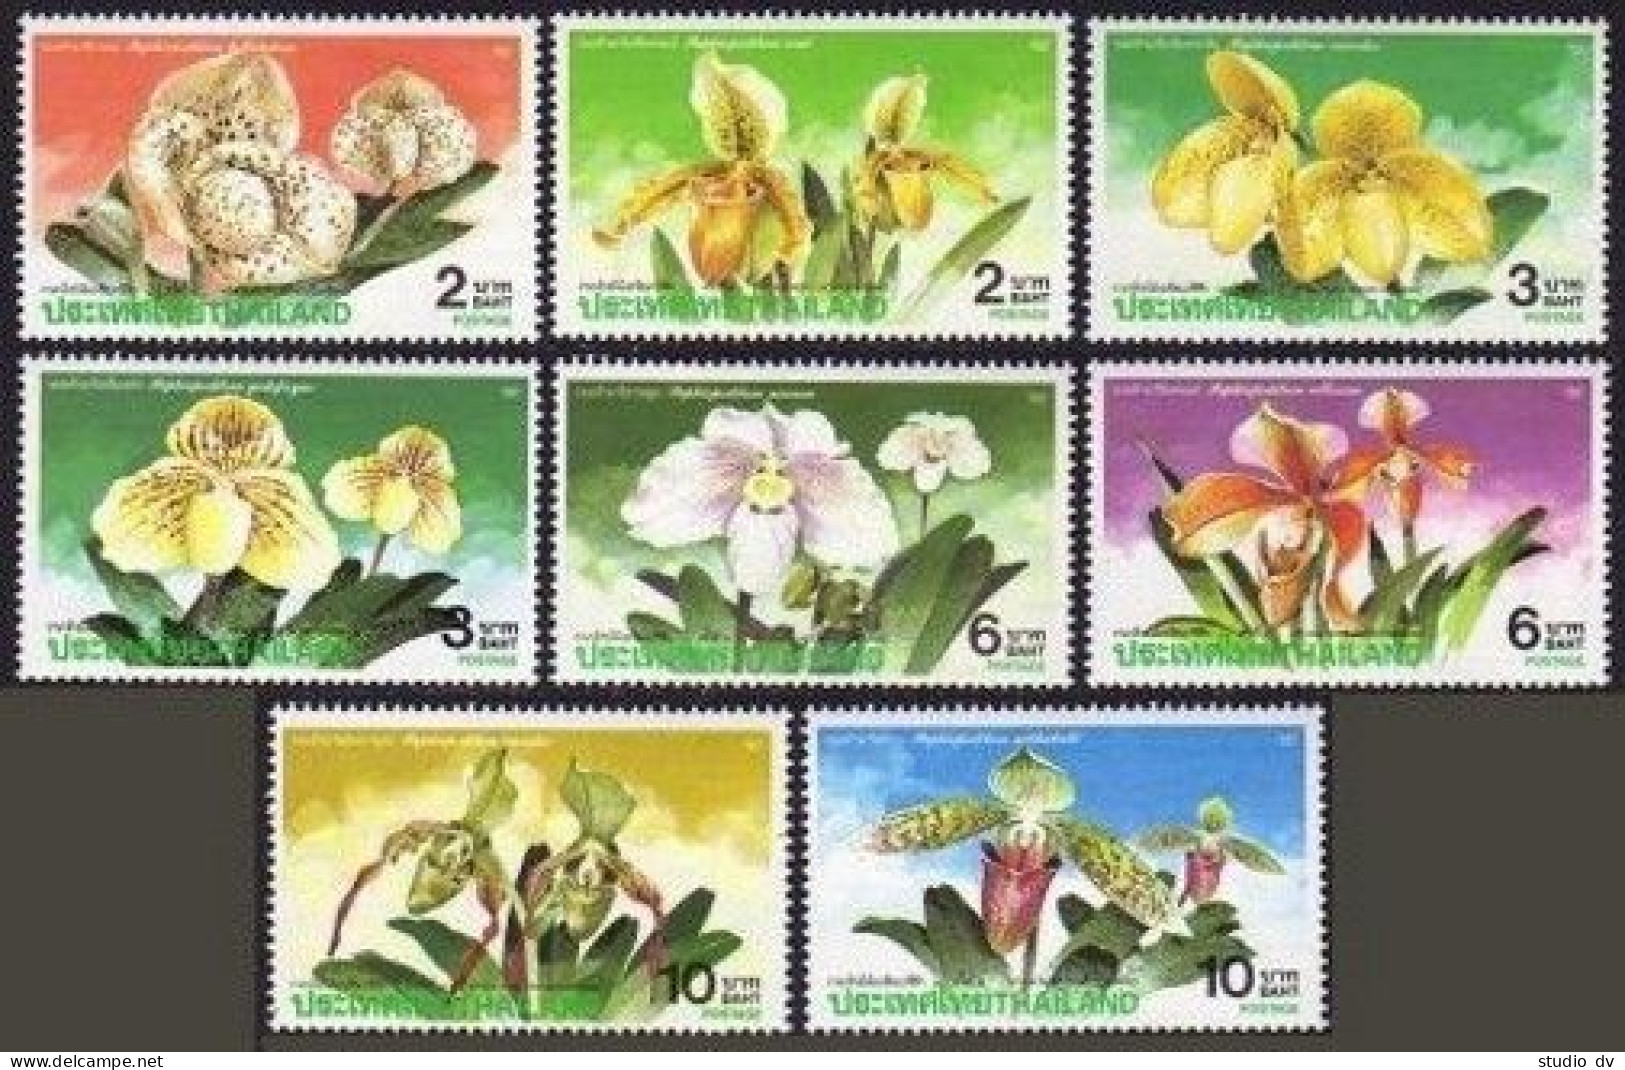 Thailand 1438-1445, 1444a-1445a A,B, MNH. Asia-Pacific Orchid Conference, 1992. - Thailand